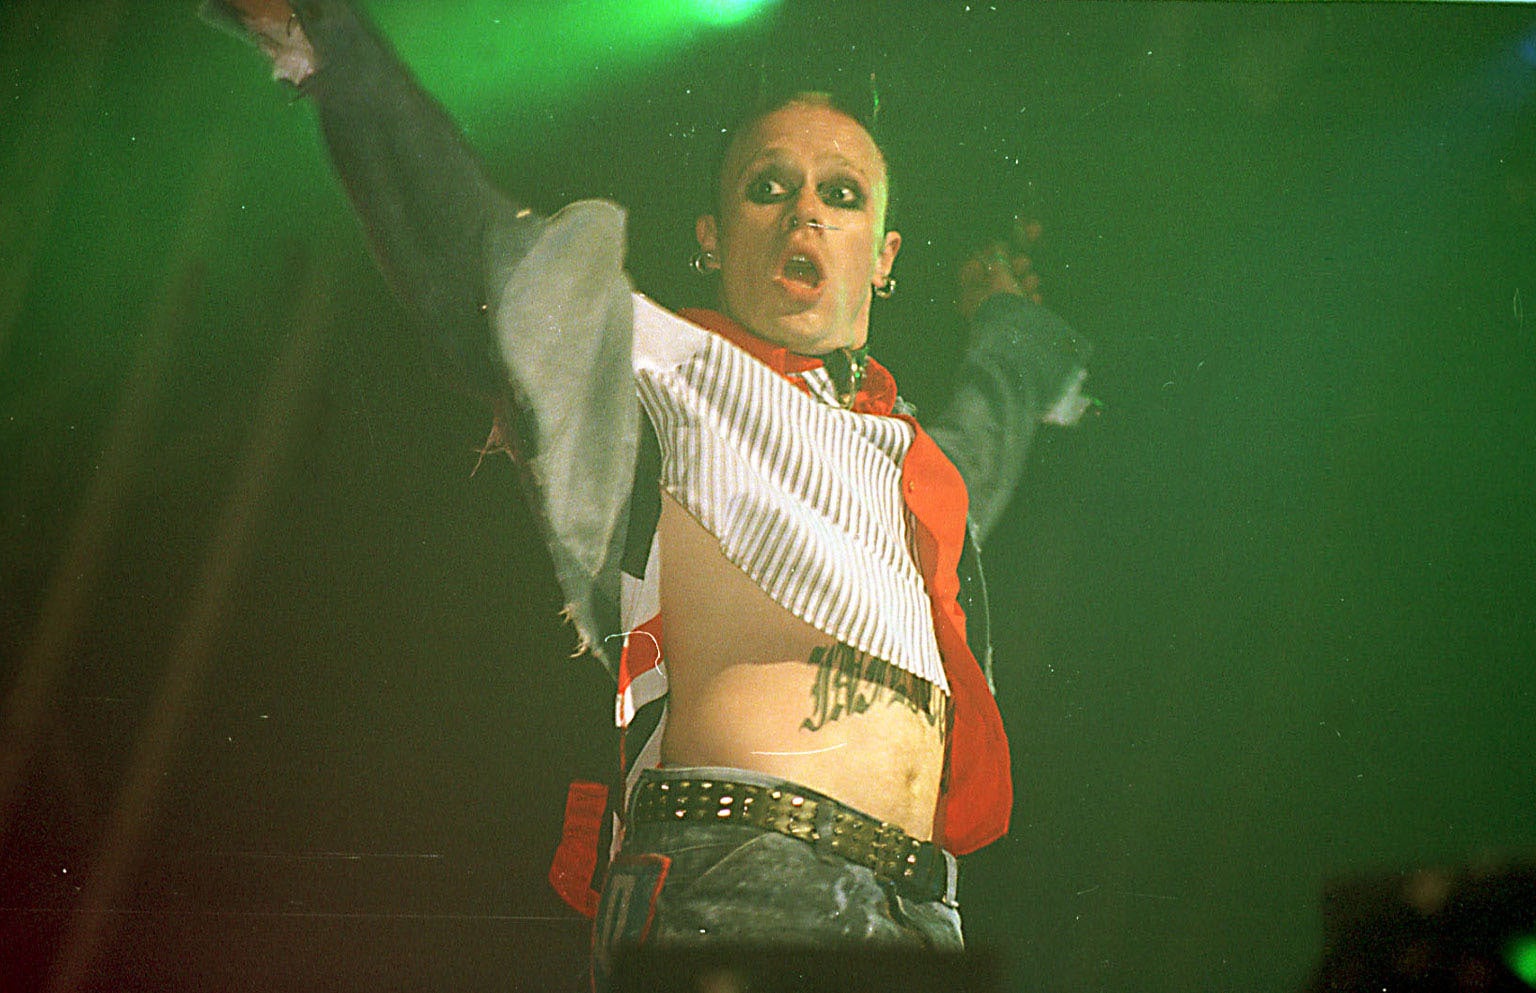 Keith Flynn of the band ‘Prodigy’ performing in 1997